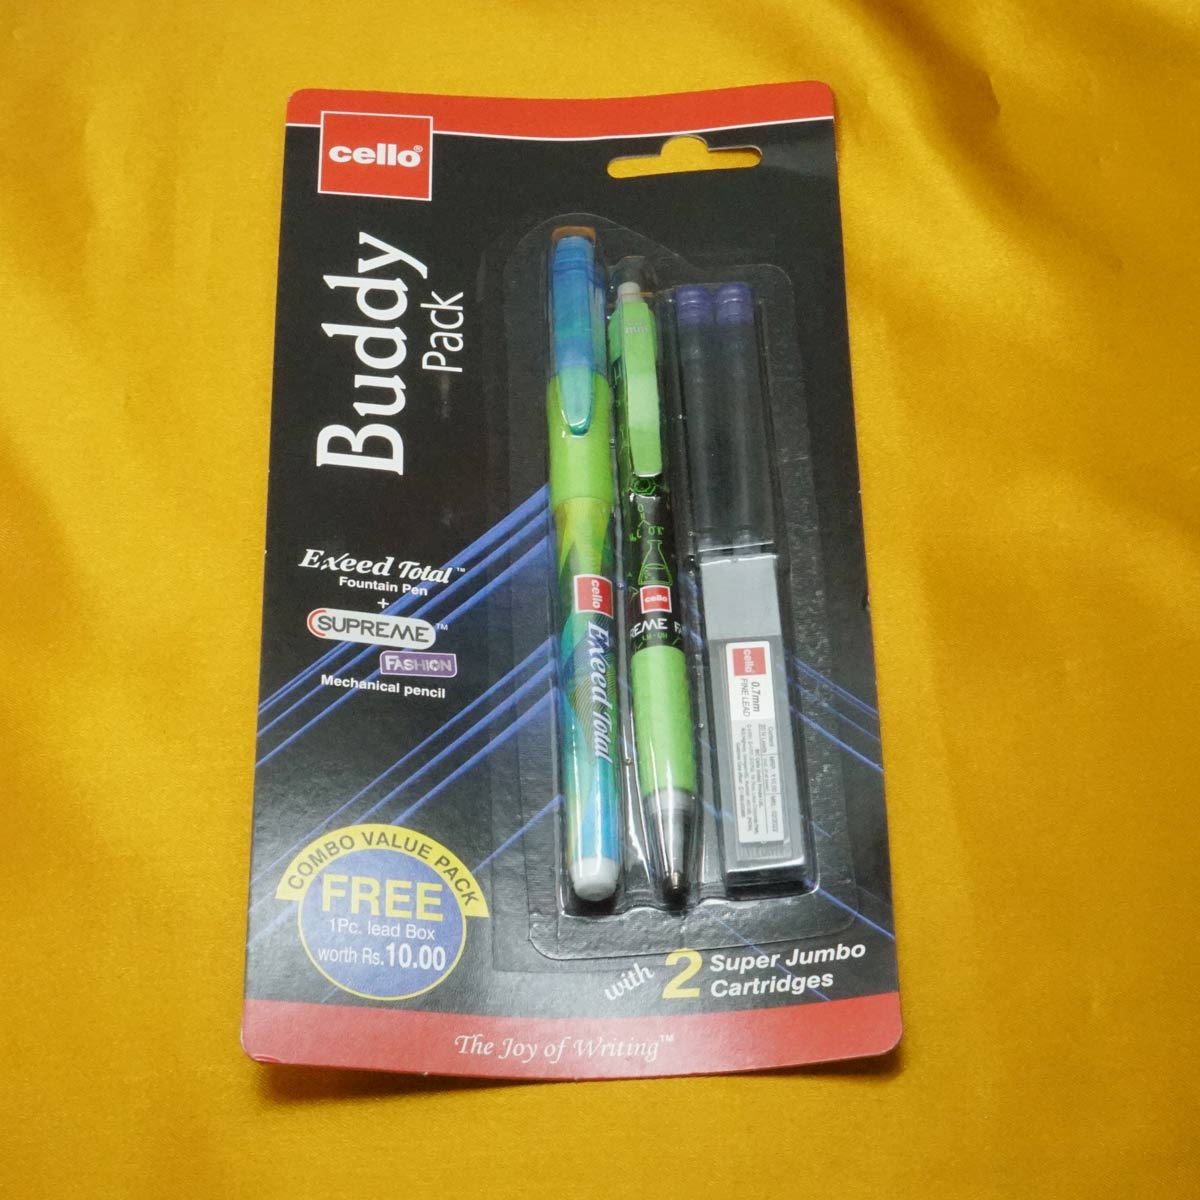 Cello Buddy Pack Green Color Designed Body Fine Nib With 0.7 Mechanical Pencil And Led And 2 Catridge Set Fountain Pen SKU 20854